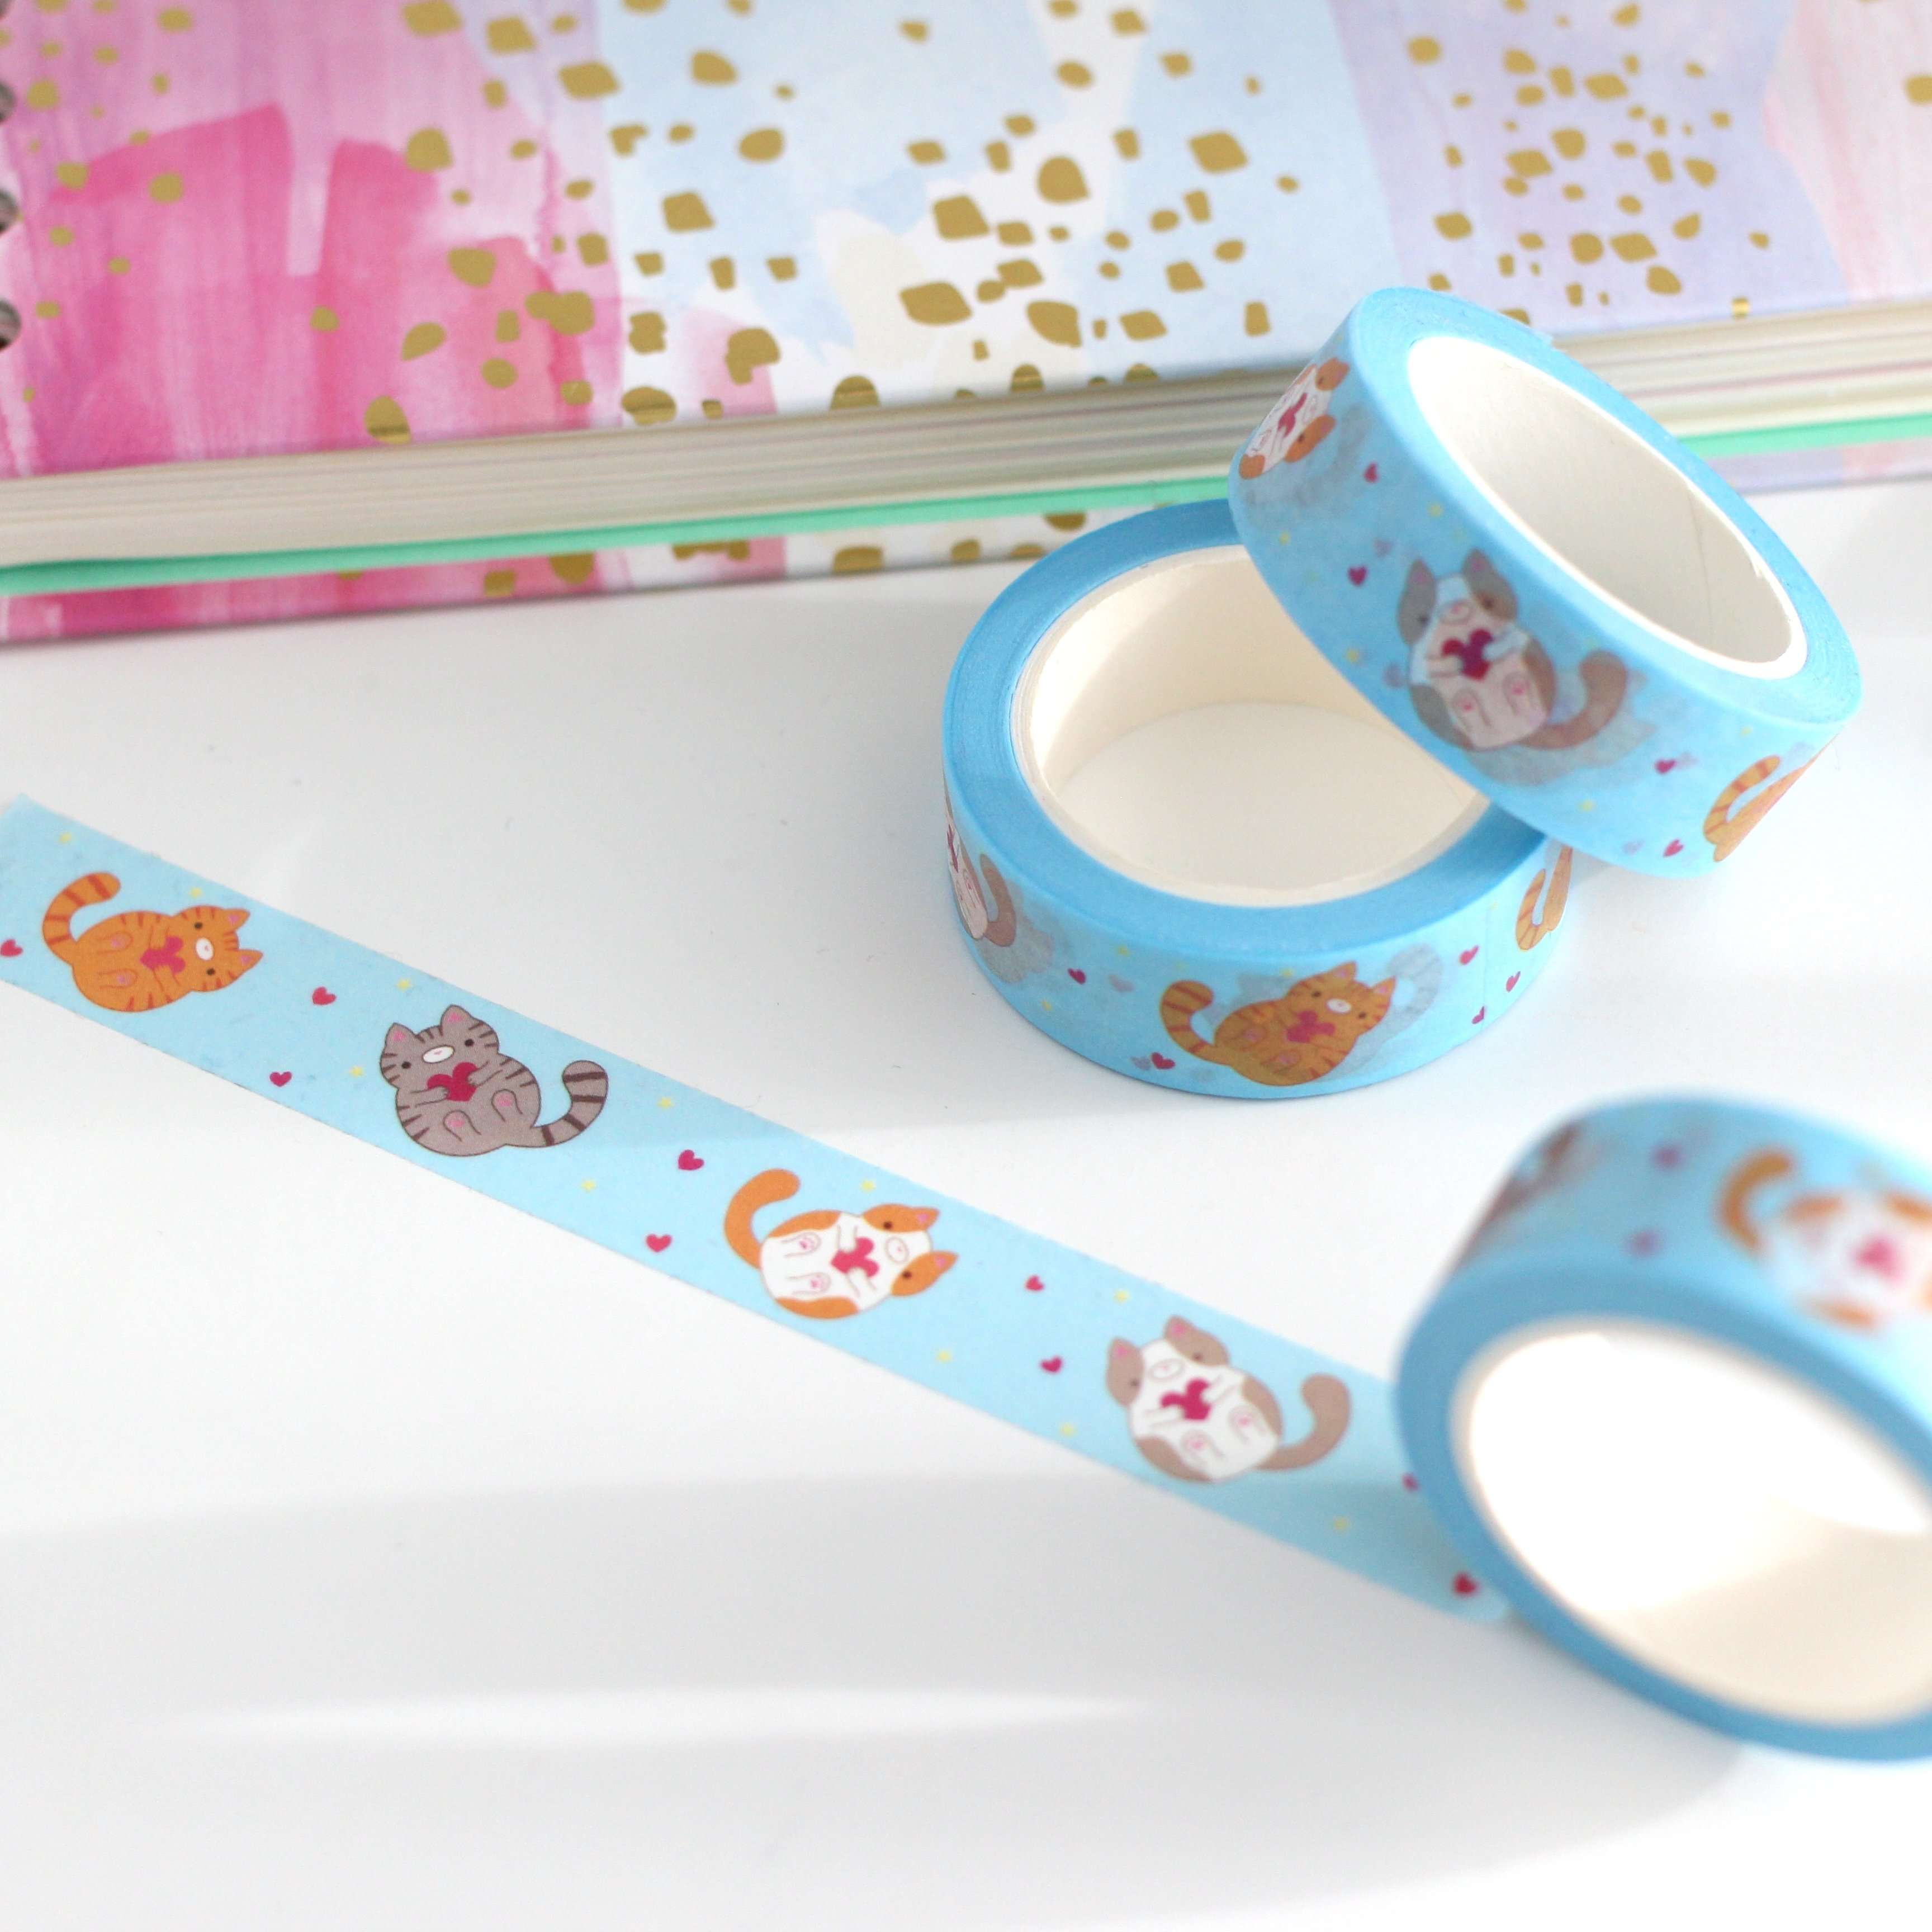 Wild Whimsy Woolies - Love Cats Washi Tape - Cute Stationery - Kitten ...